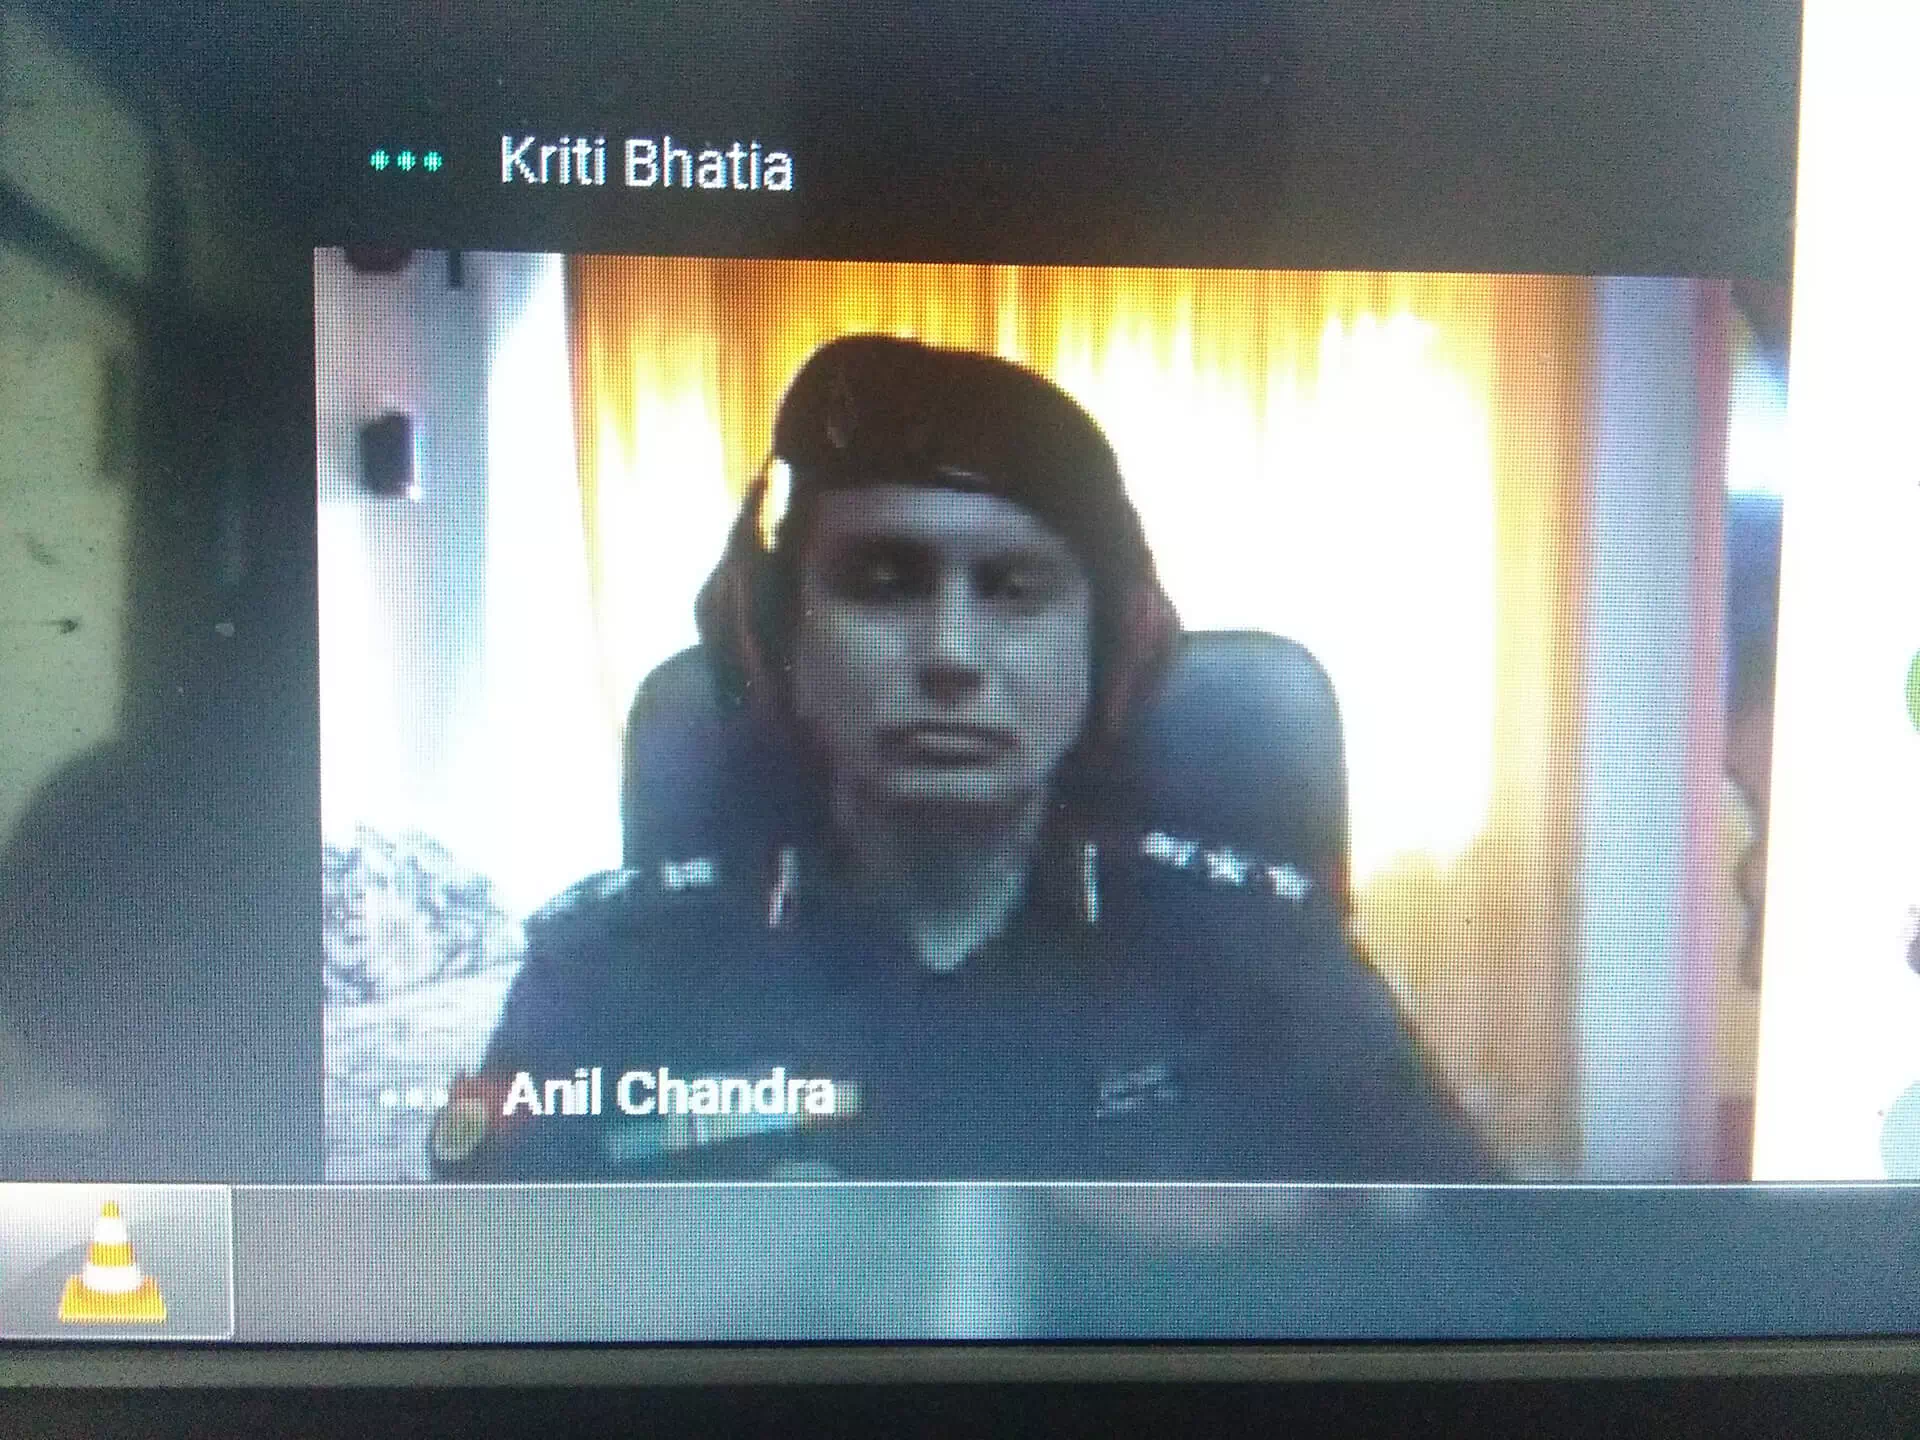 Webinar on ‘Career in Defence Services’ by Col. Anil Chandra spoke held on 5th September, 2020